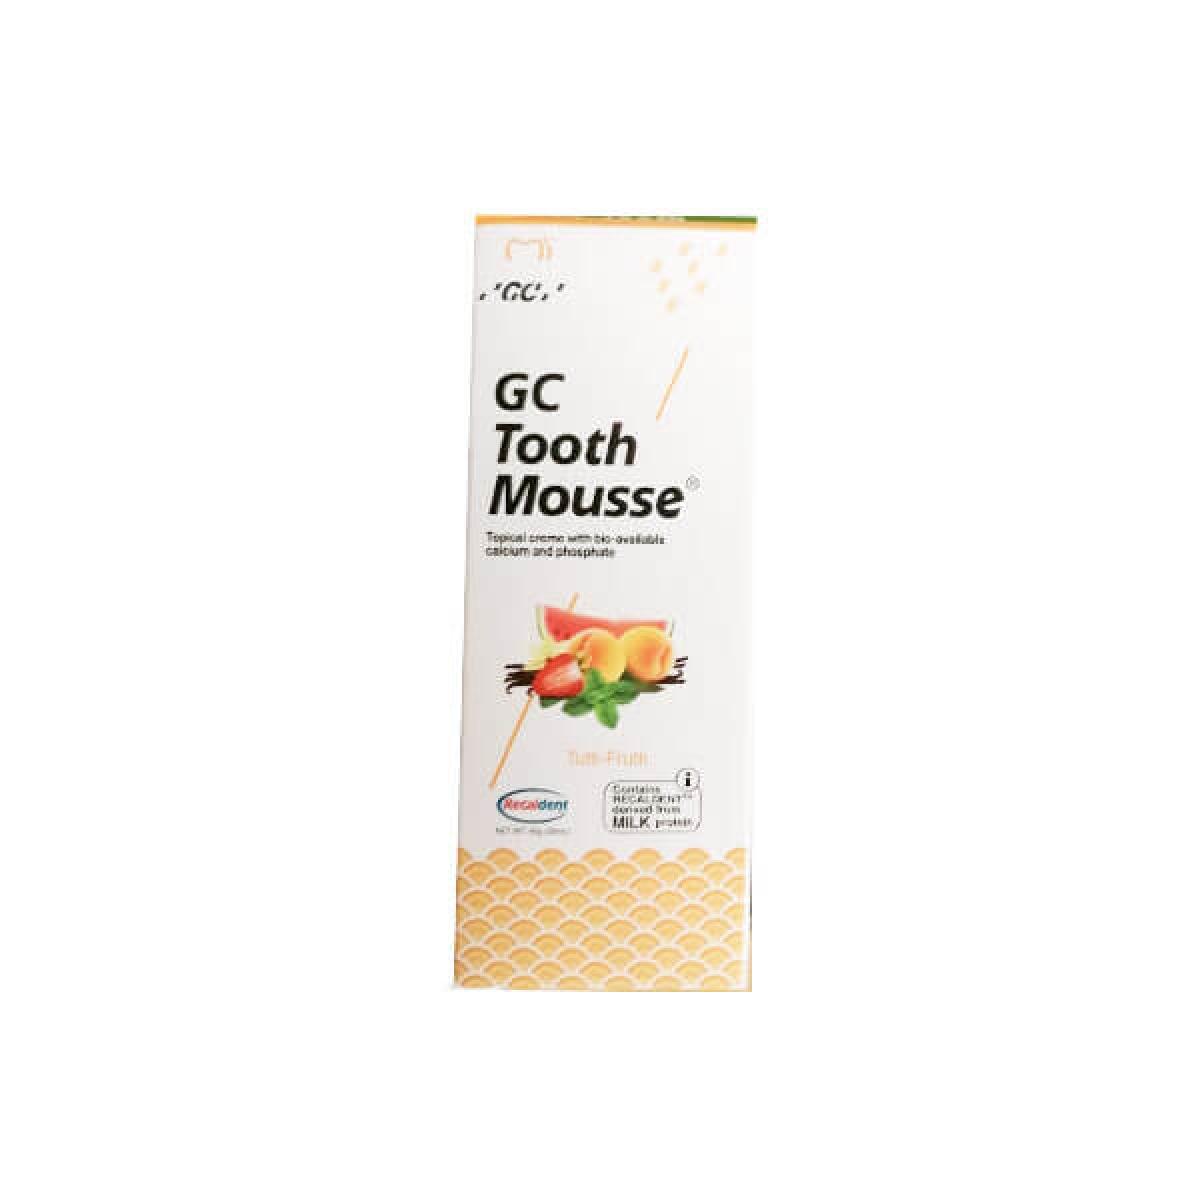 GC Tooth Mousse soin dentaire reminéralisant